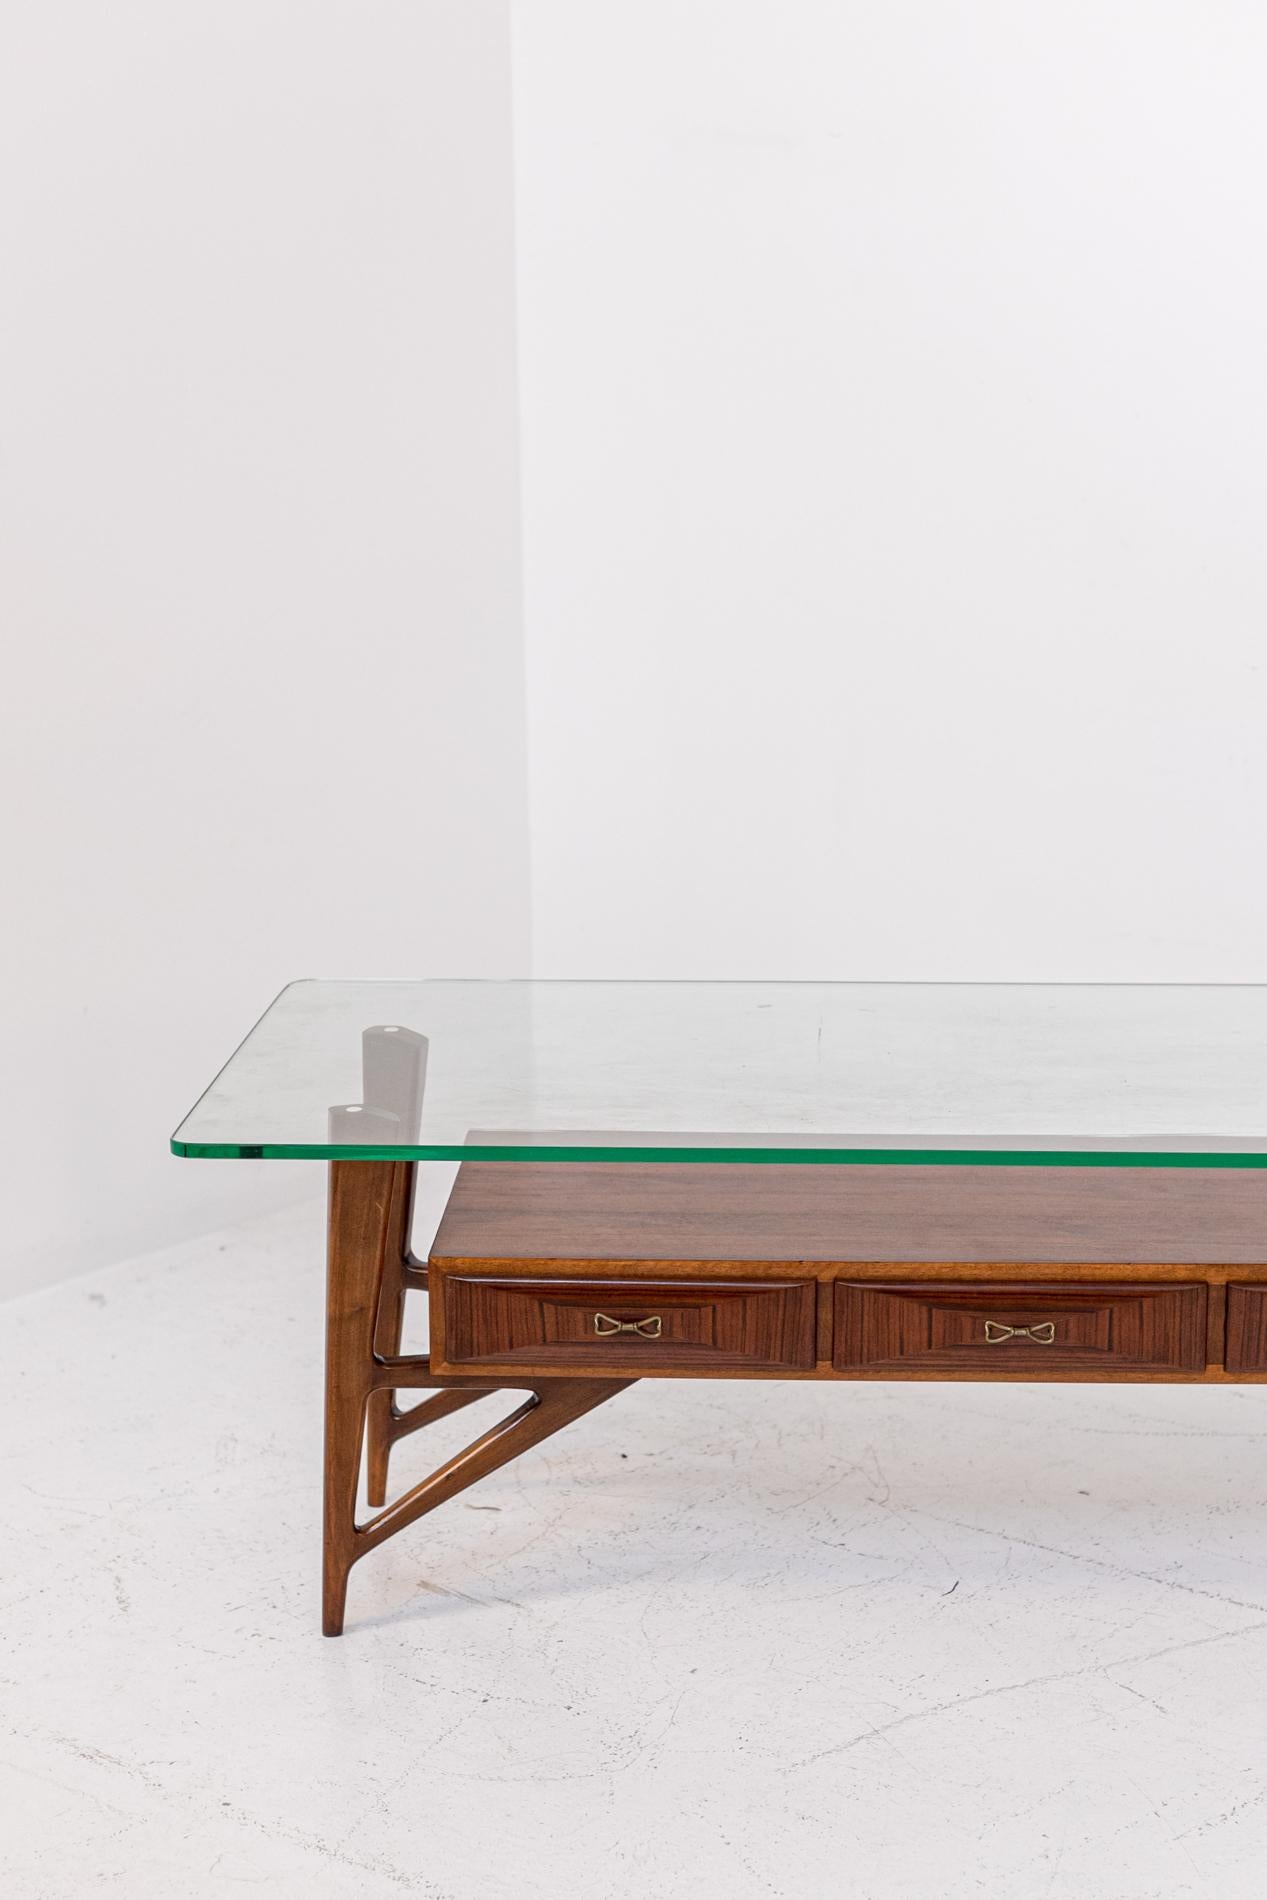 Large Italian coffee table attributed to Ico Parisi from the 1950s. The glass is original of the time and is very thick with beautiful green veining. Large size.
The coffee table has a nice line has 4 legs of triangular shape that act as a support